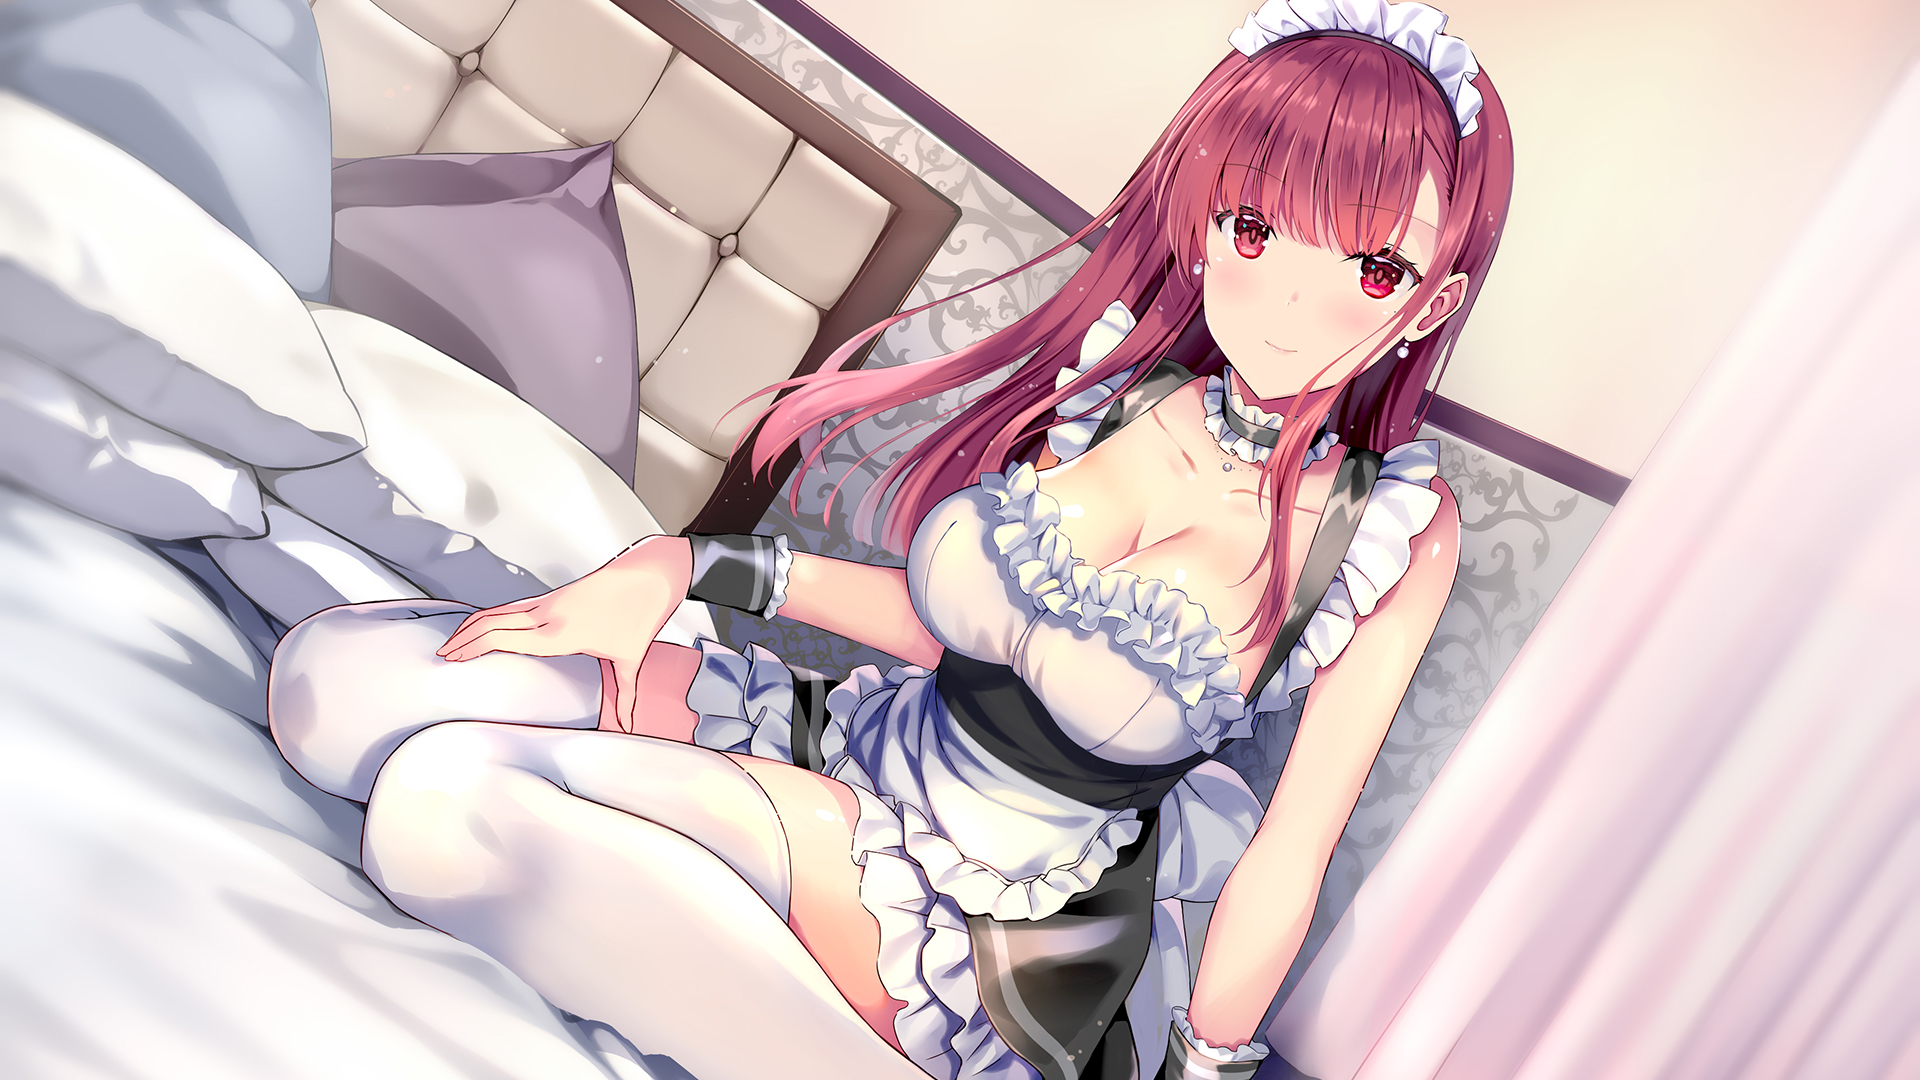 Anime 1920x1080 cleavage maid outfit red eyes redhead headband long hair thigh-highs in bed anime girls R_E_I_